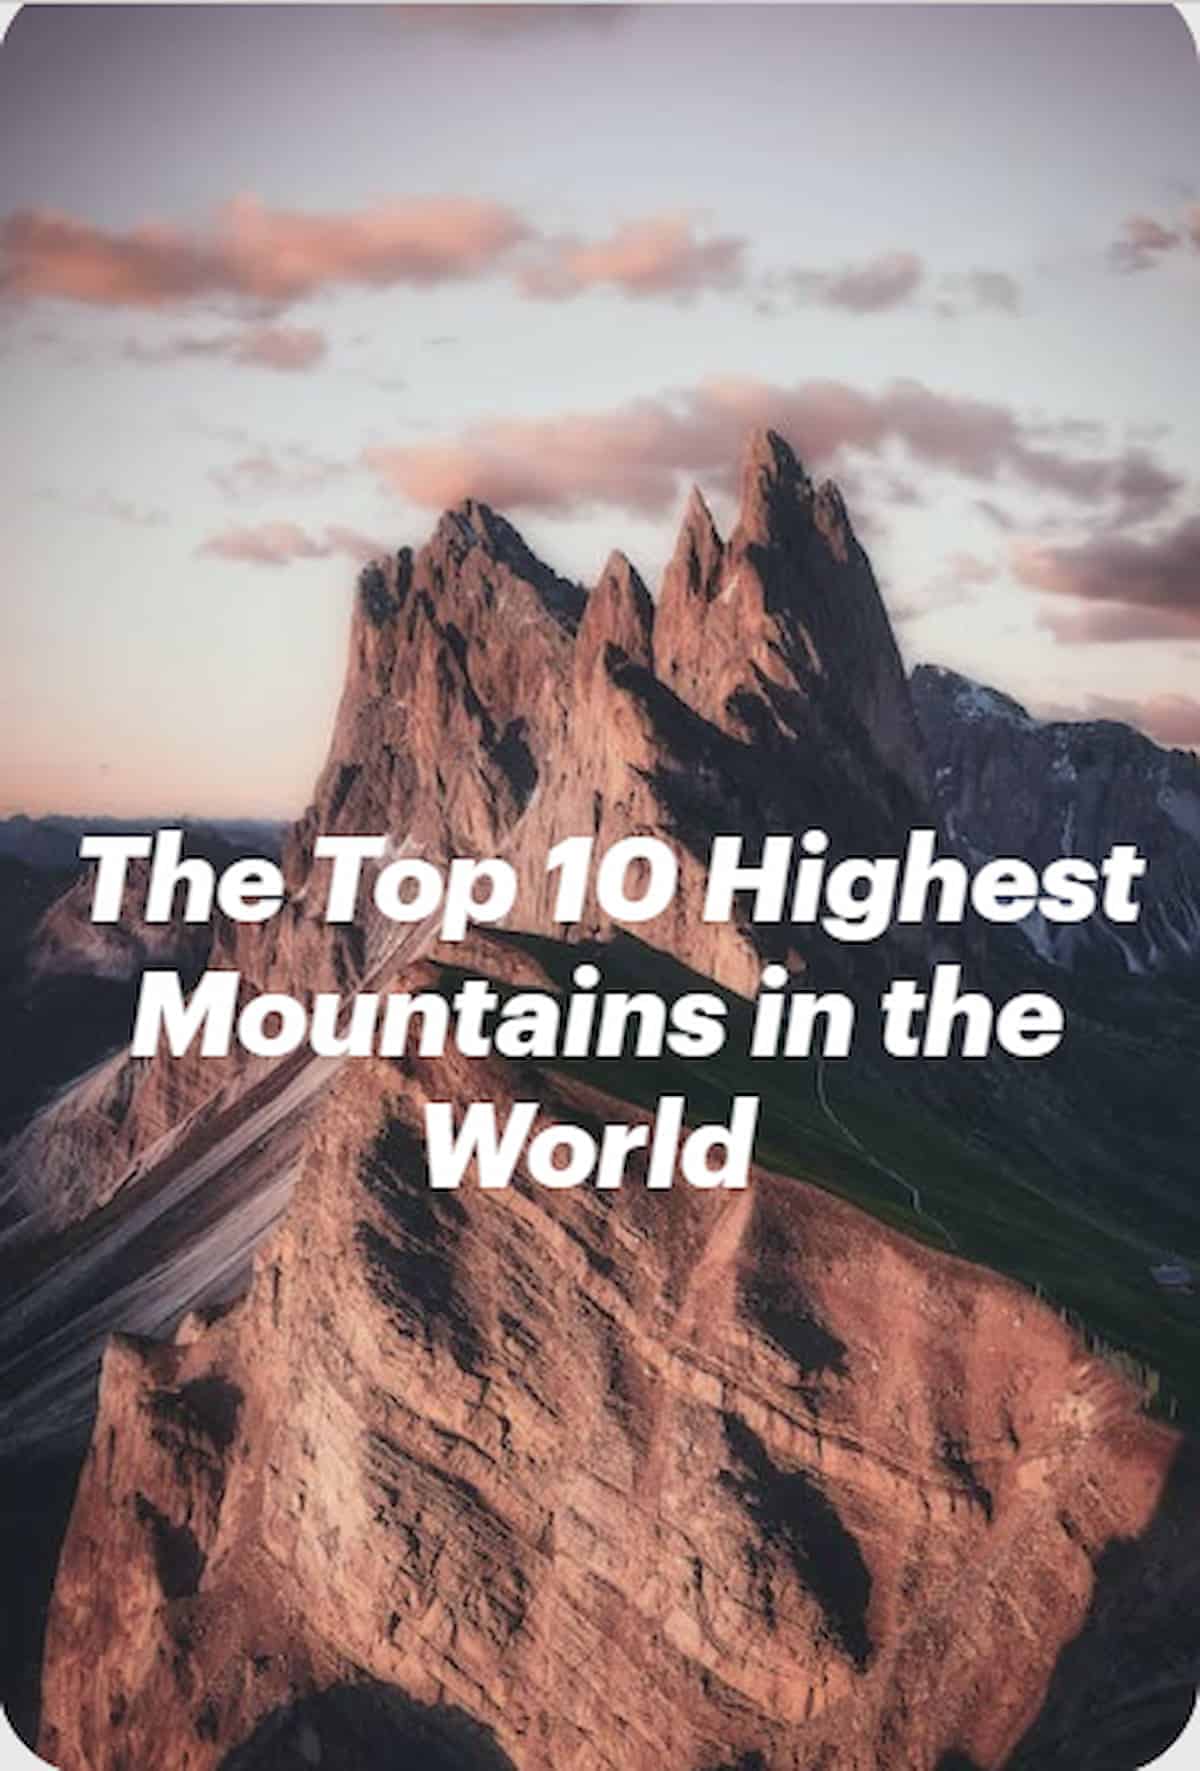 Conquering the Peaks: The Top 10 Highest Mountains in the World